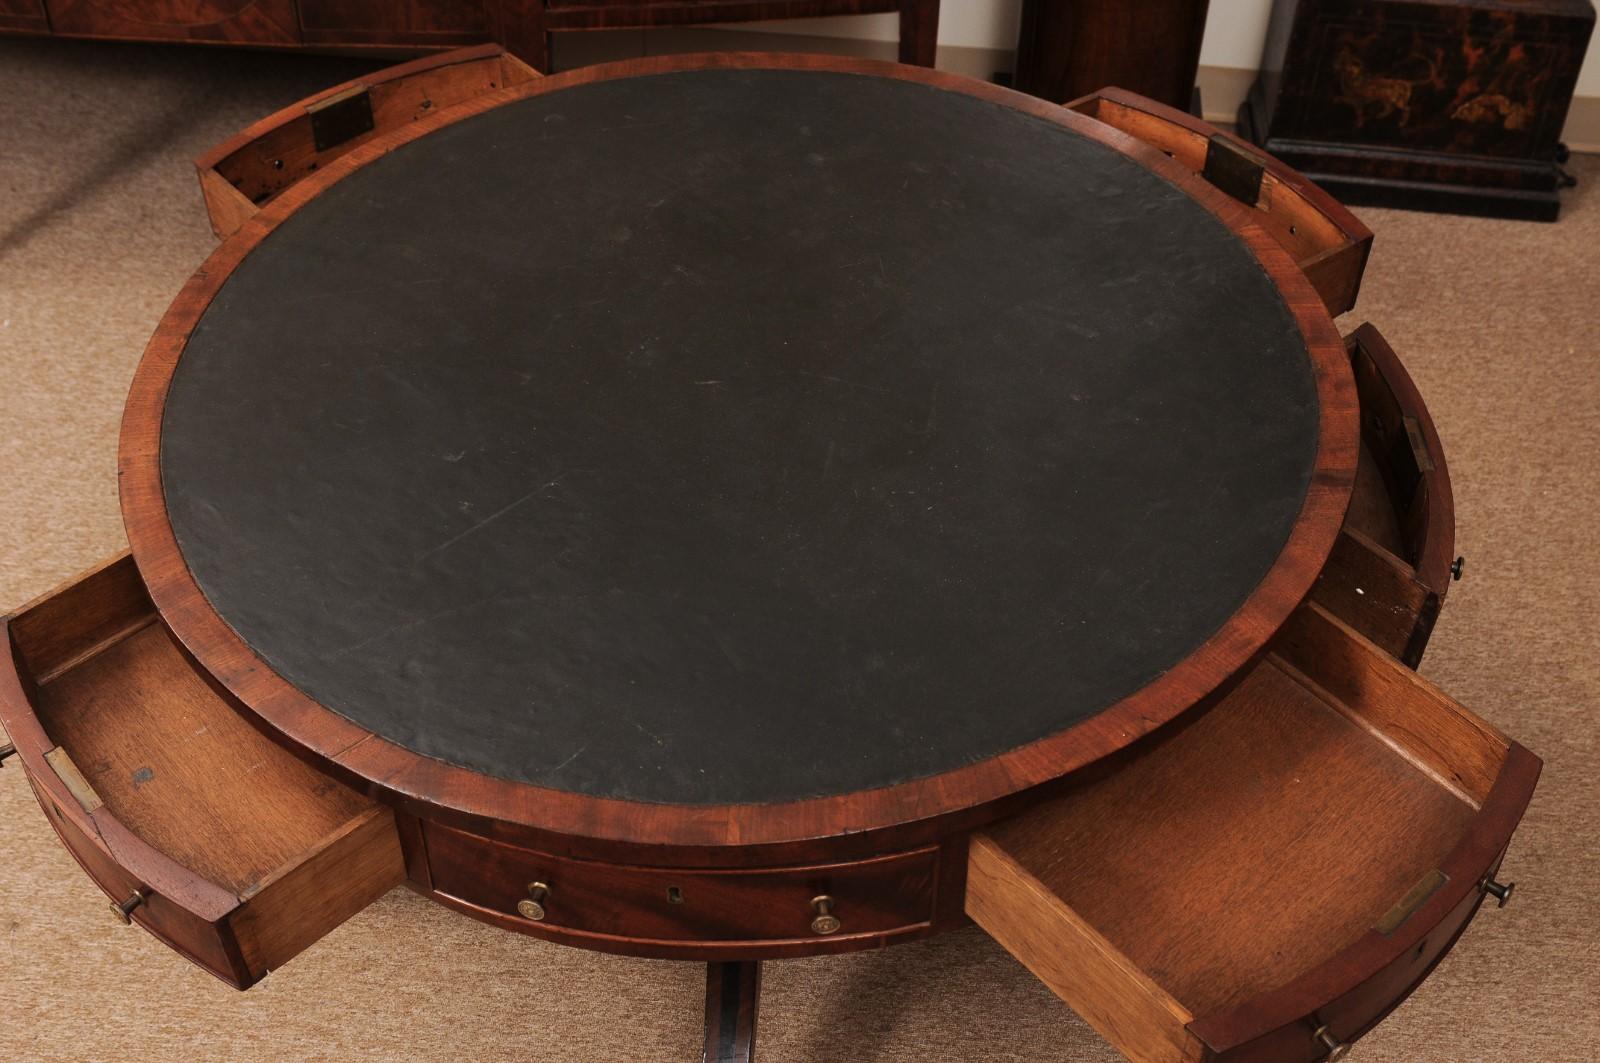 19th Century English Mahogany Drum Table with Black Leather Top For Sale 4